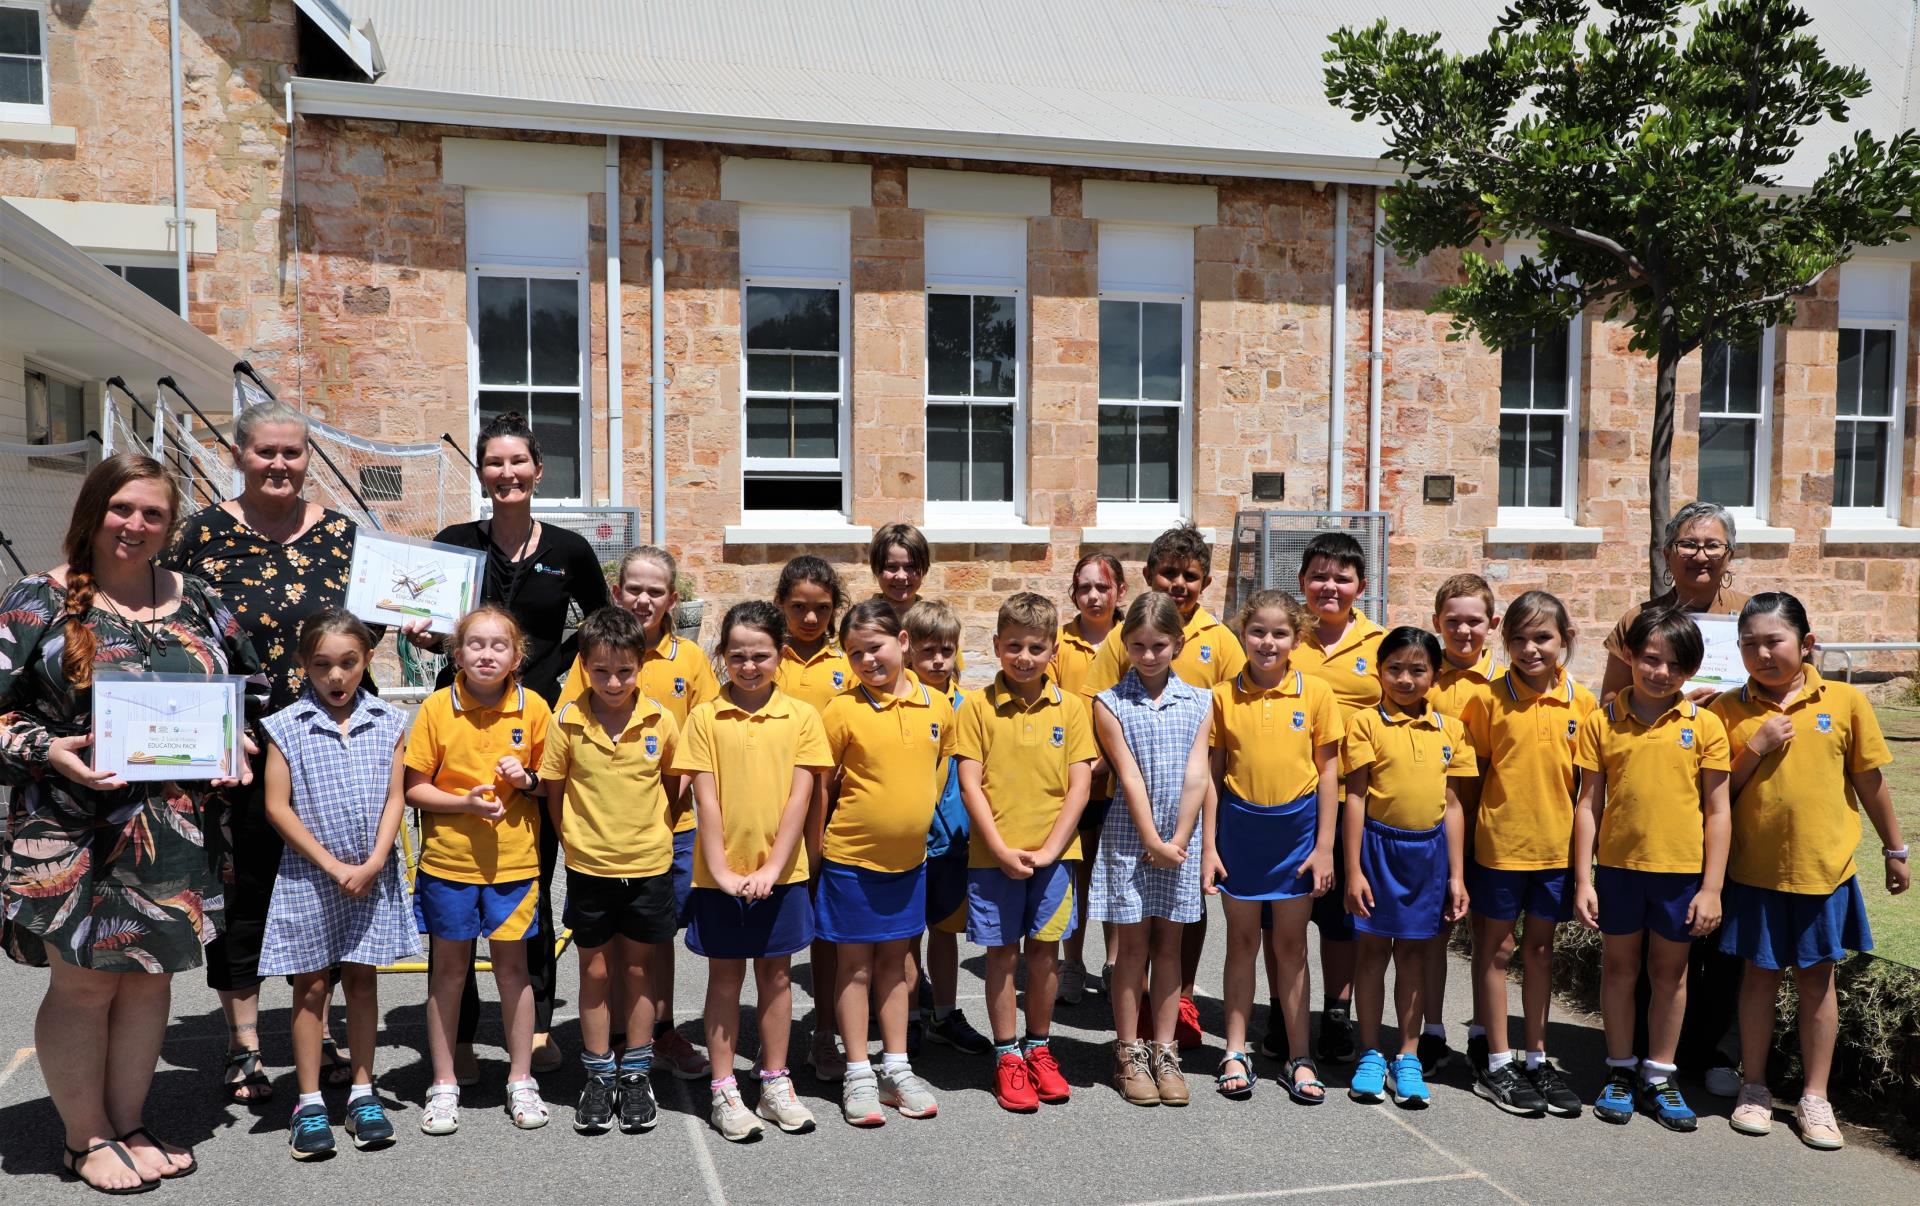 (L-R) Geraldton Primary School Year 3 Teacher Crystal Murray, Education Assistant Special Needs Careena Gryta, City of Greater Geraldton Coordinator Heritage Services Lorin Cox, Geraldton Primary School Principle Jacquie Quartermaine with Year 3 students. 